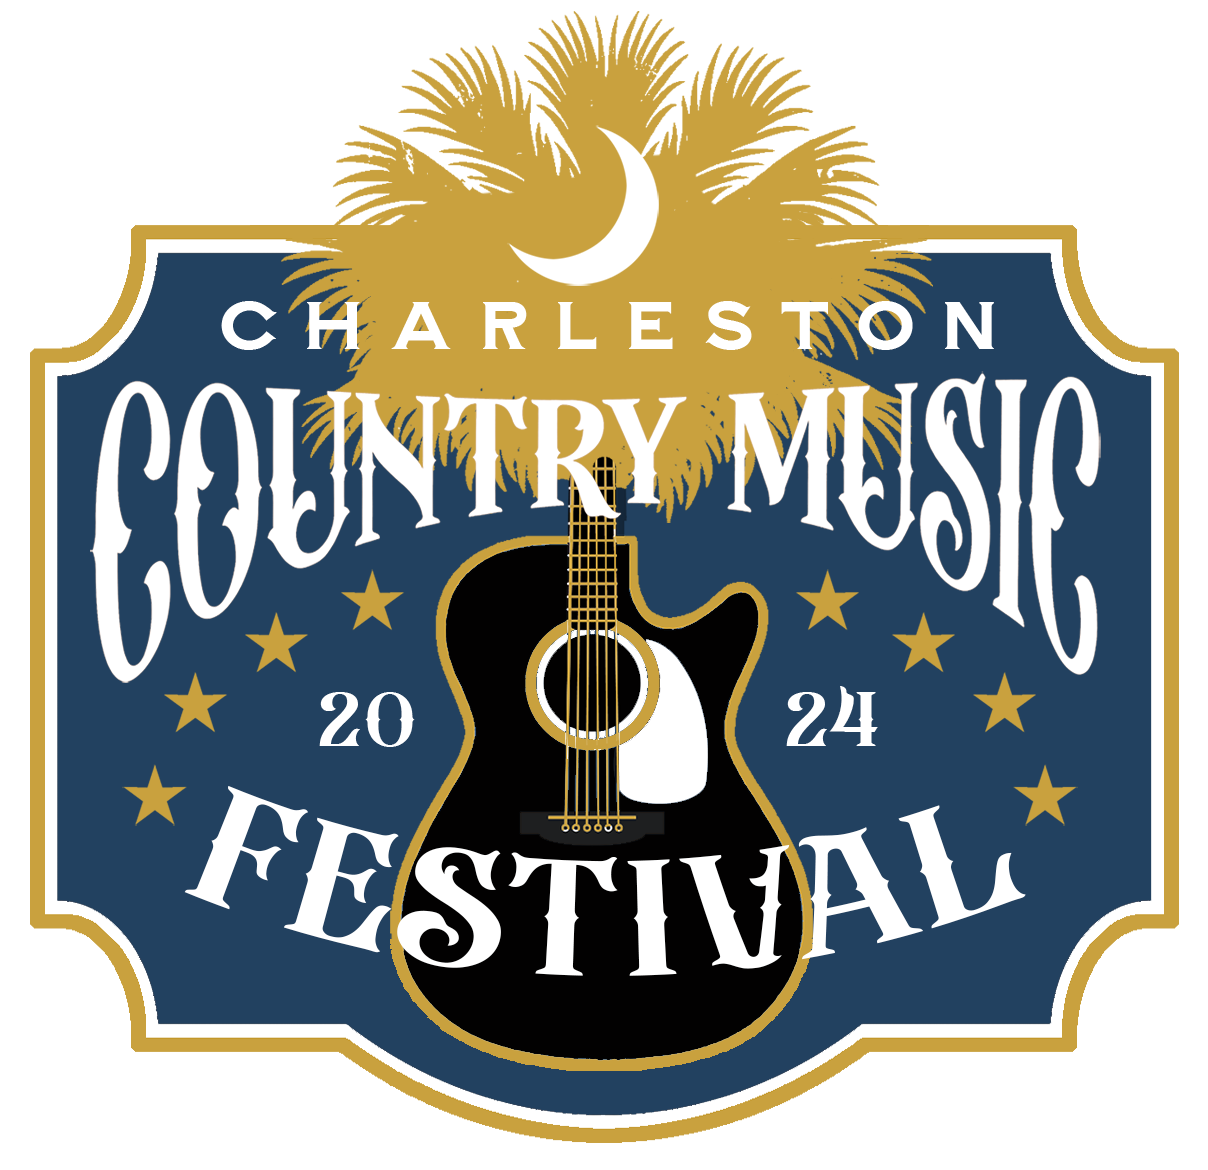 Charleston Country Music Festival Tickets on Sale Now